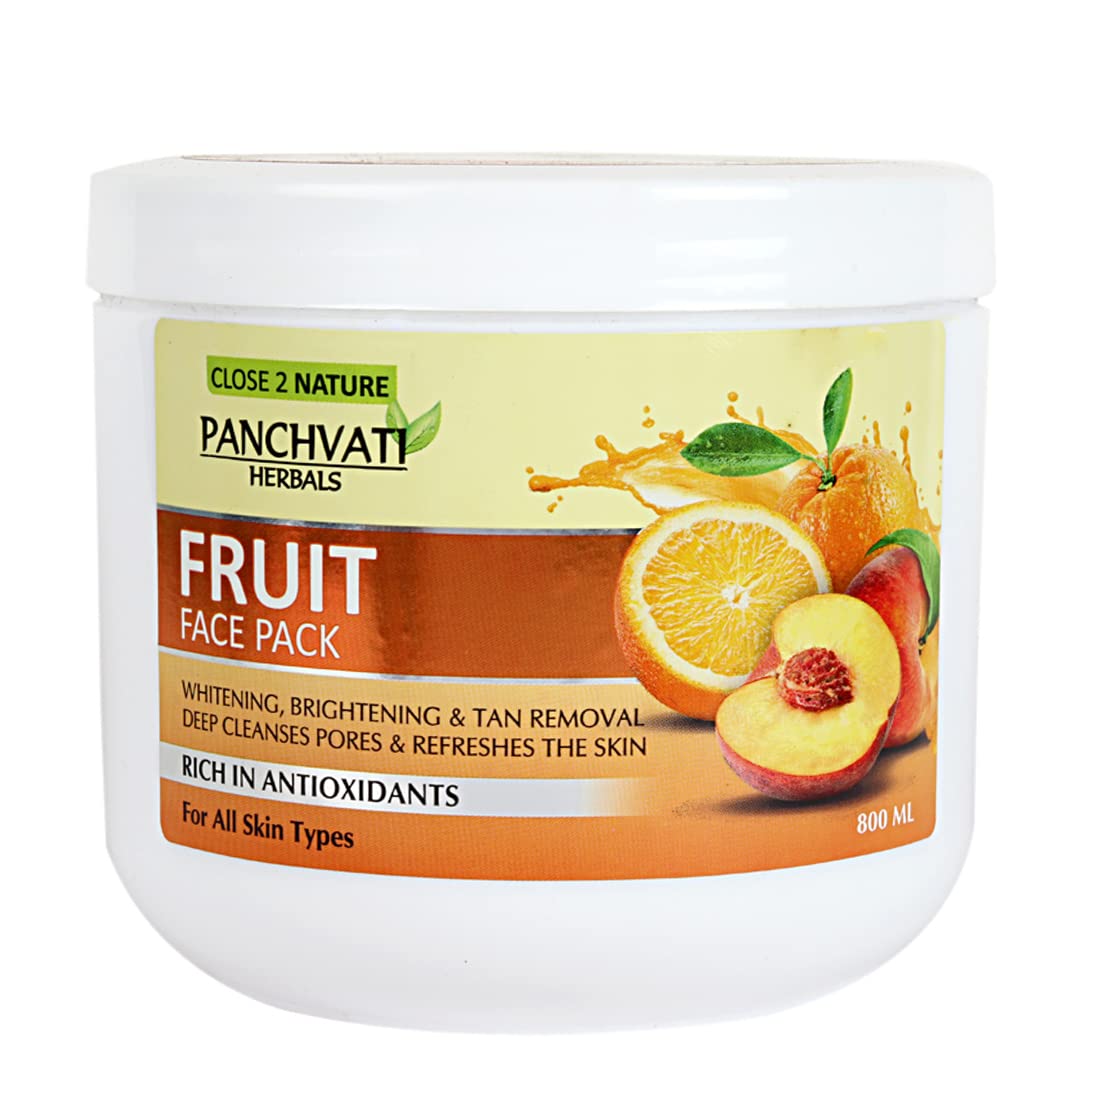 Panchvati Herbals Fruit Face Pack for Restore Lost Shine & Glow of Skin - 800 ml